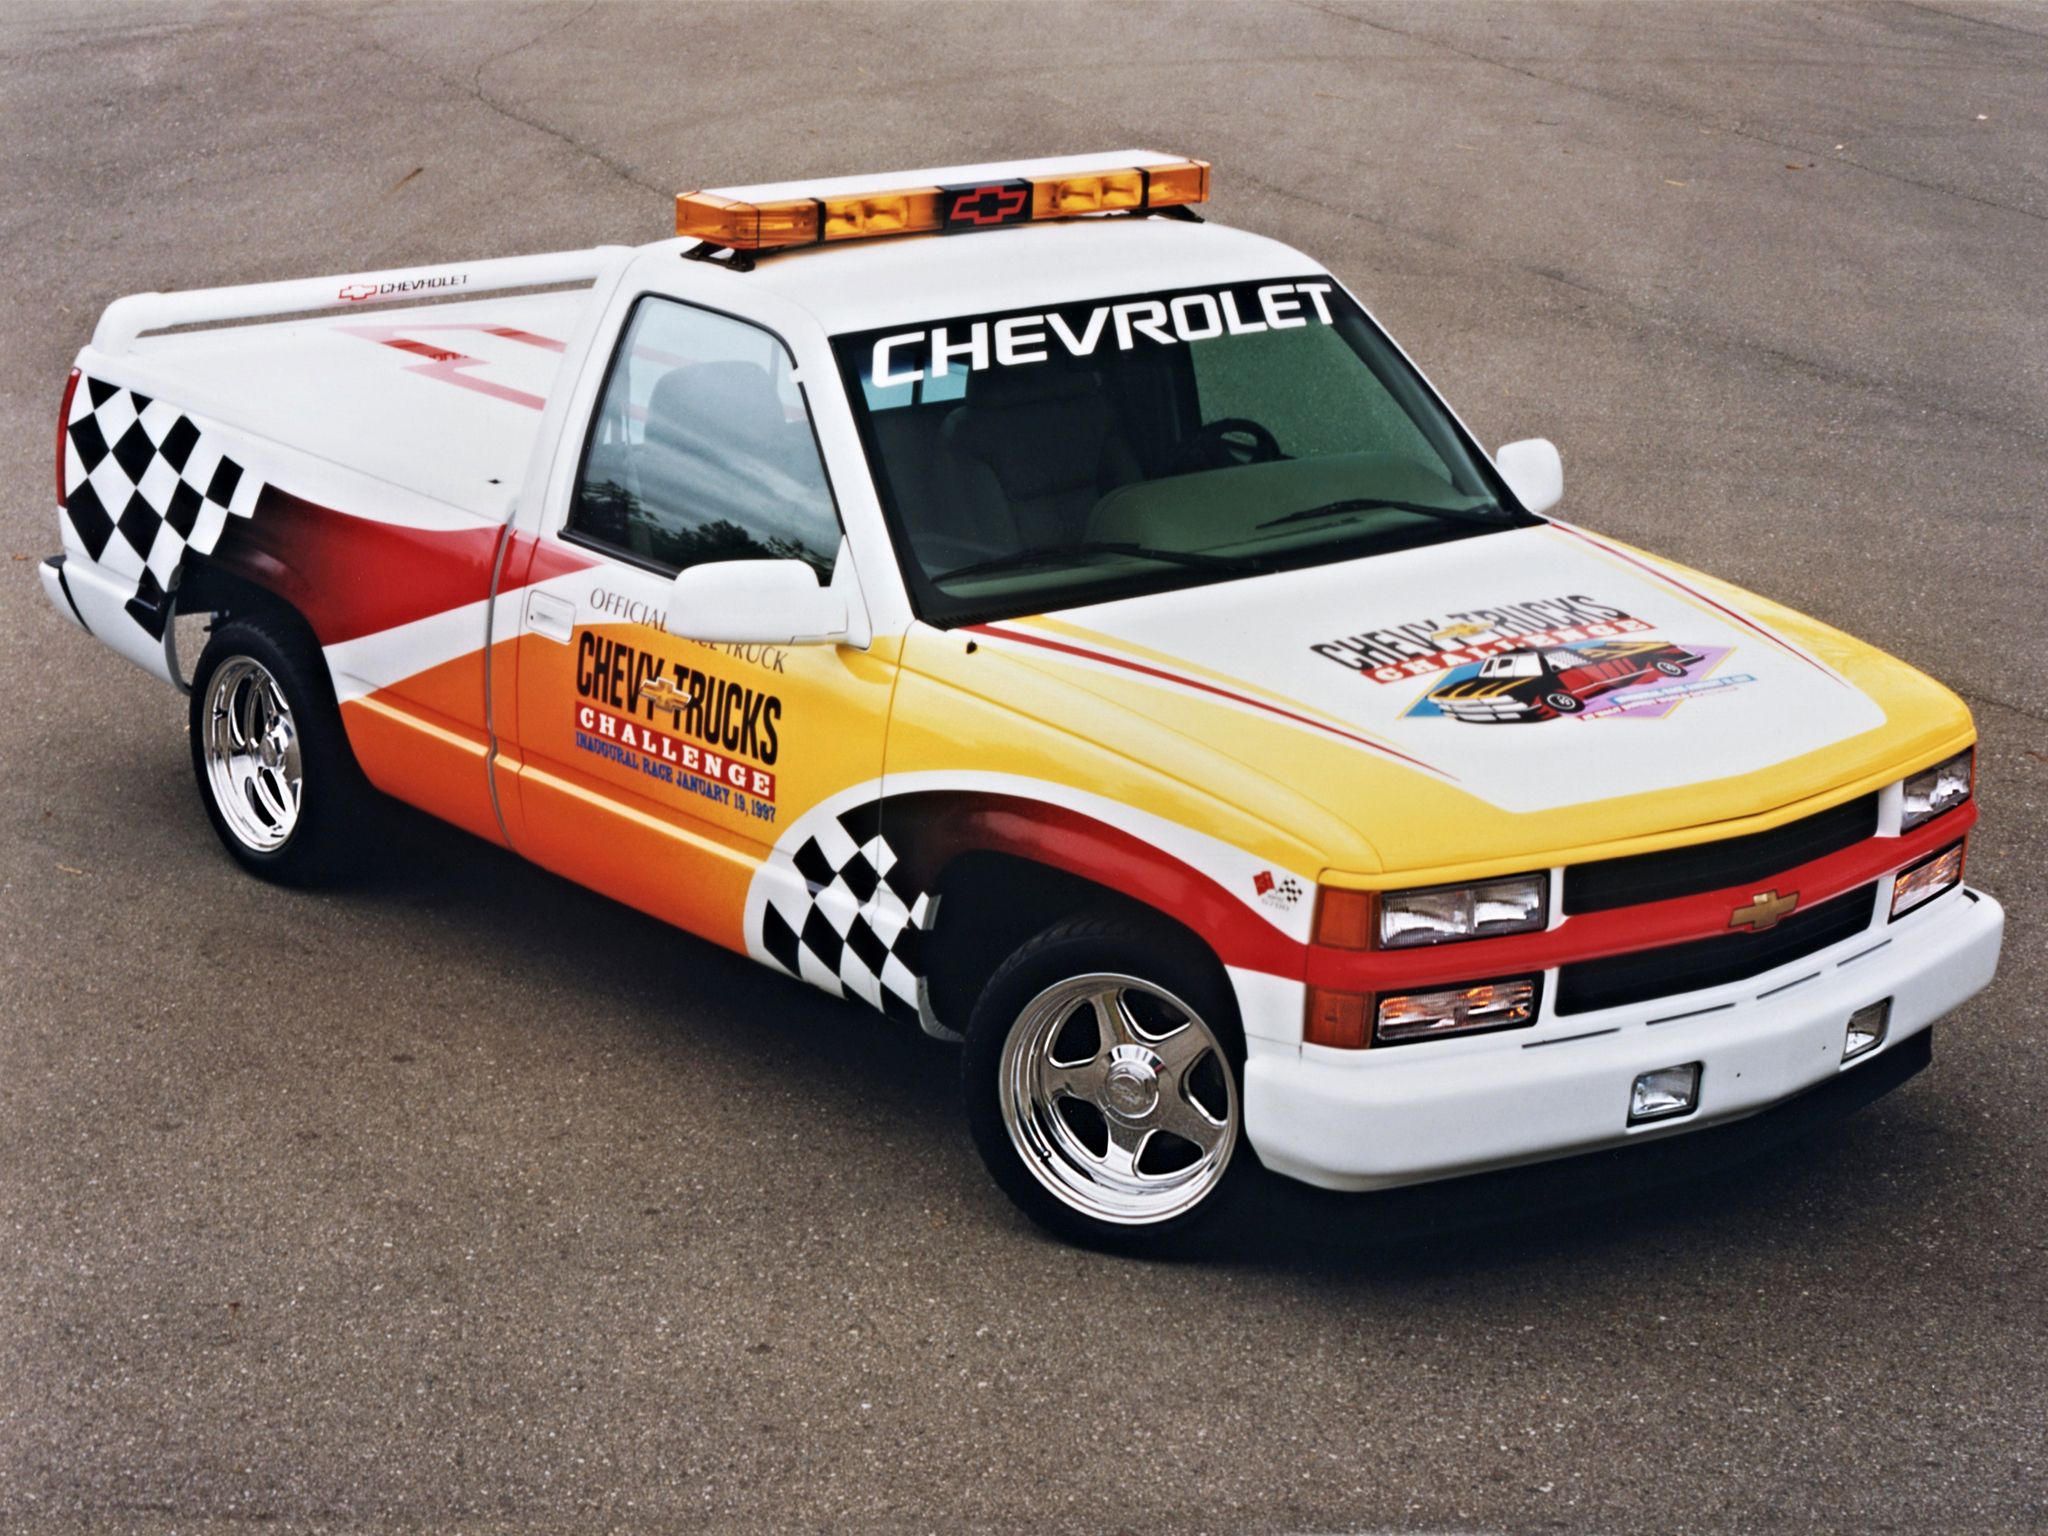 Chevrolet Superute Wallpapers